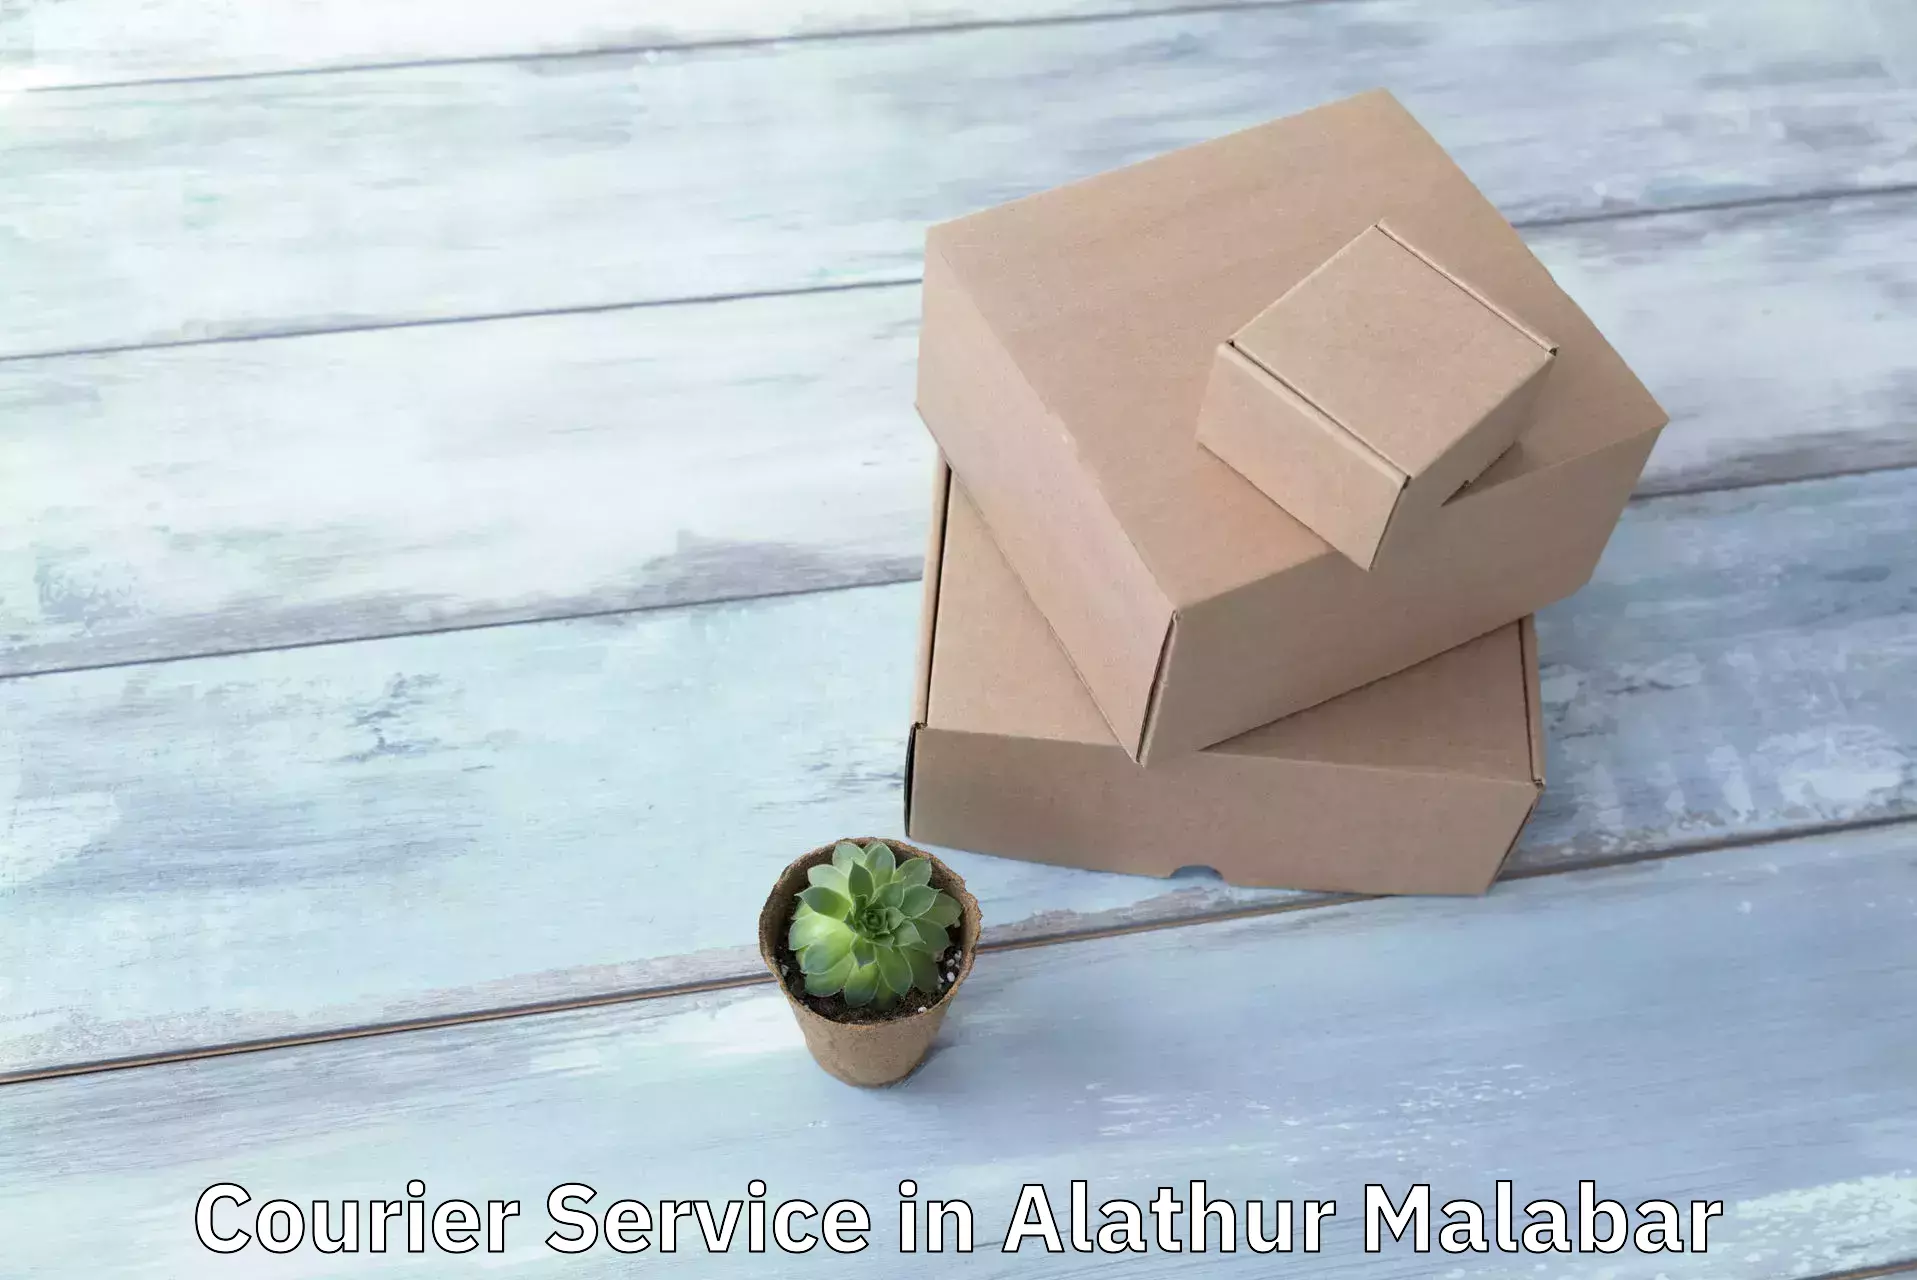 Sustainable delivery practices in Alathur Malabar